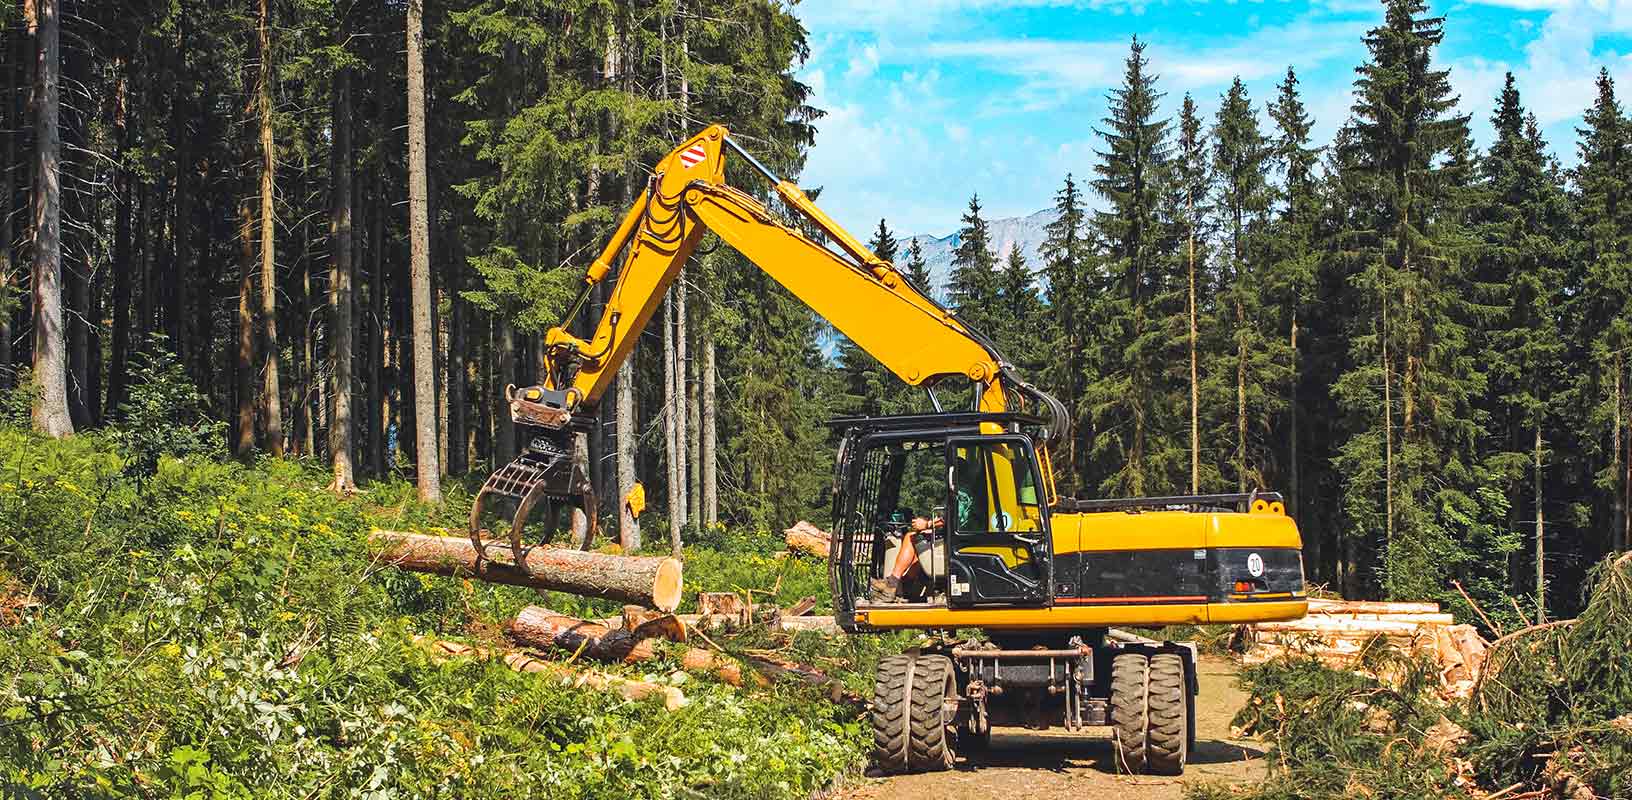 Heavy forestry equipment on logging site 